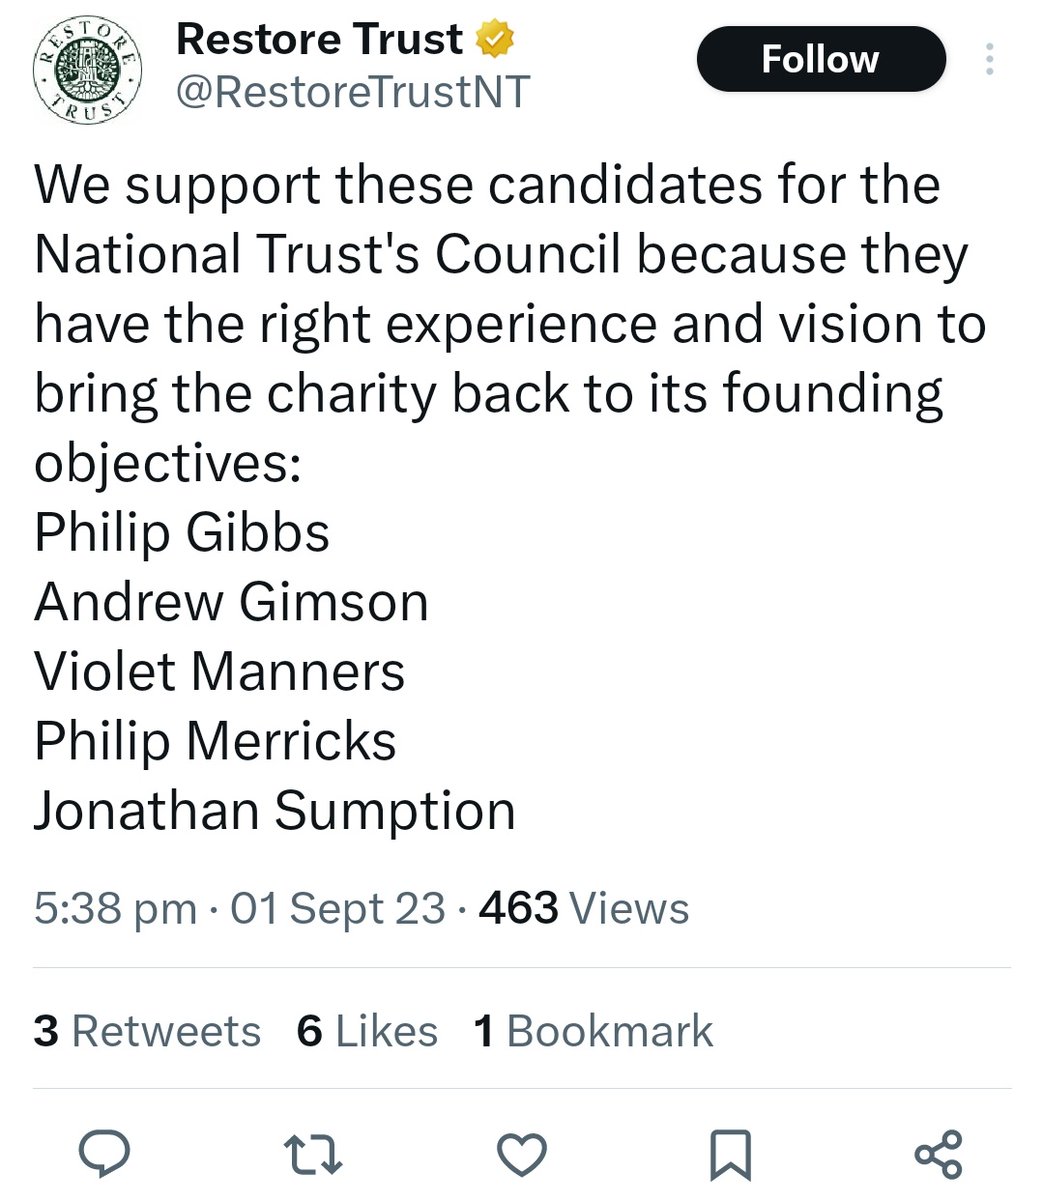 The AstroTurfers ride again. After almost six months of silence 'Restore Trust' pops up again hoping to elect their people to the National Trust council... If you are a member please make sure you vote for anyone but these buffoons.